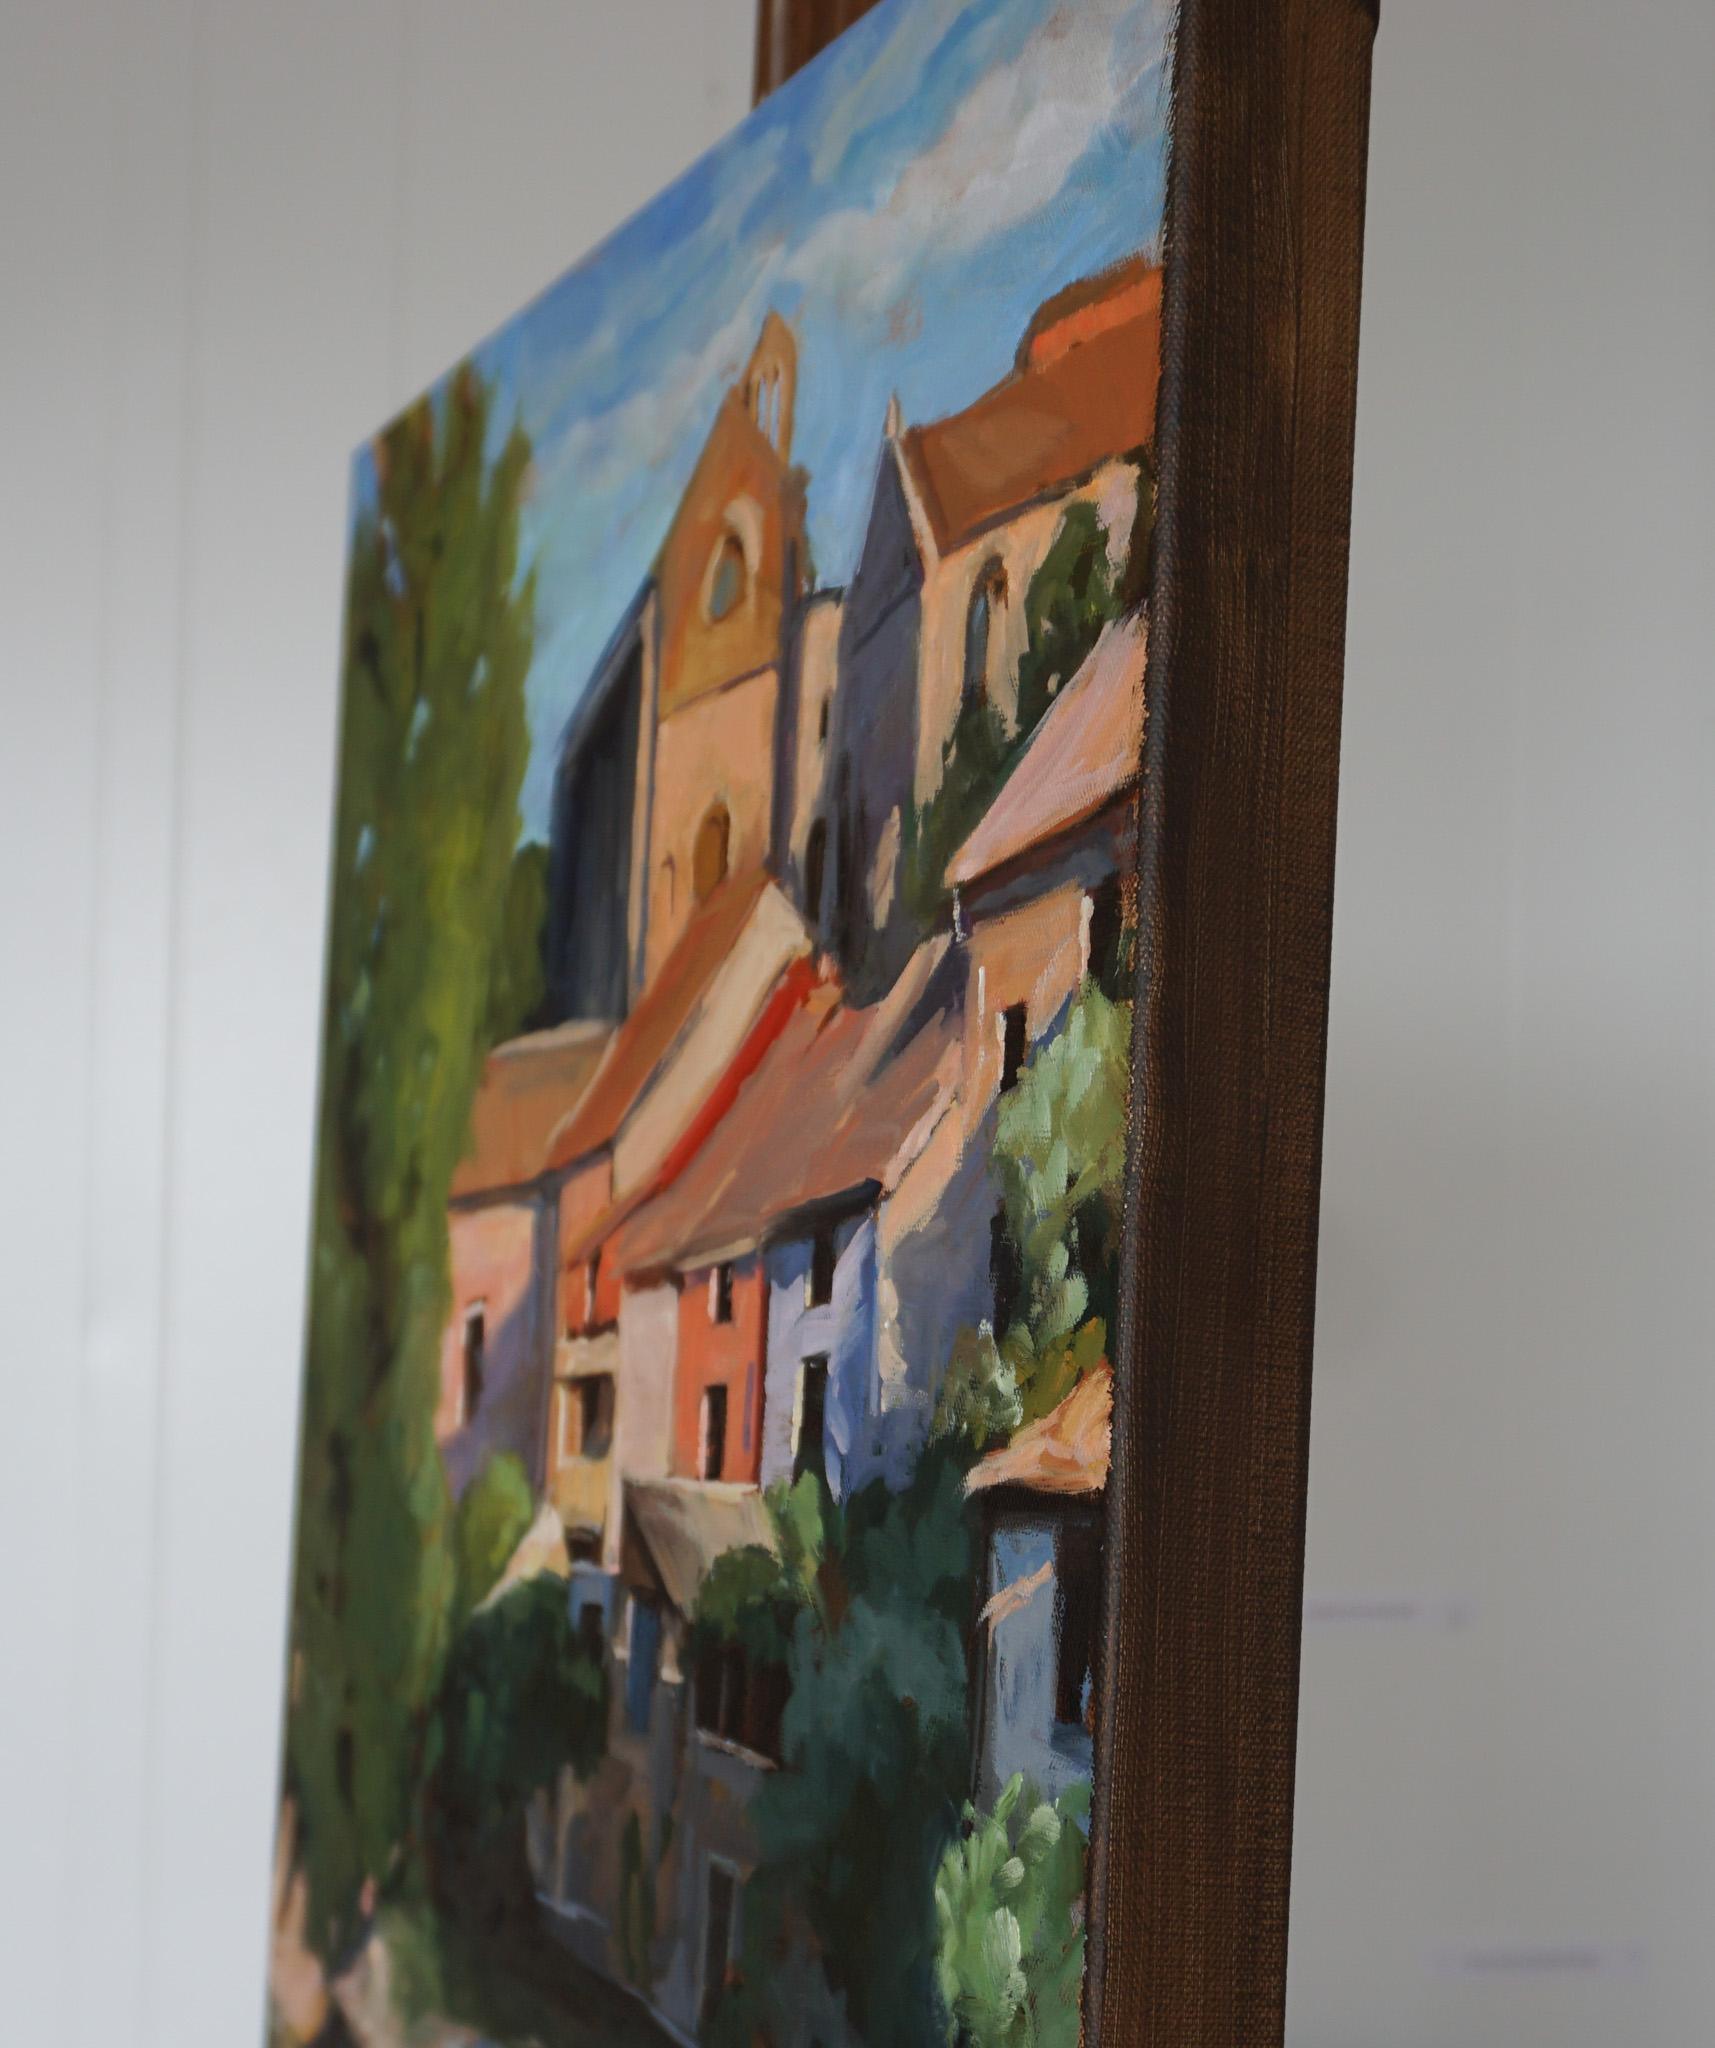 <p>Artist Comments<br>The painting offers a glimpse of the houses surrounding a river in Estella, Spain, a charming town along the Camino de Santiago. The sun casts a warm glow onto the picturesque location, tossing shadows onto apricot-colored